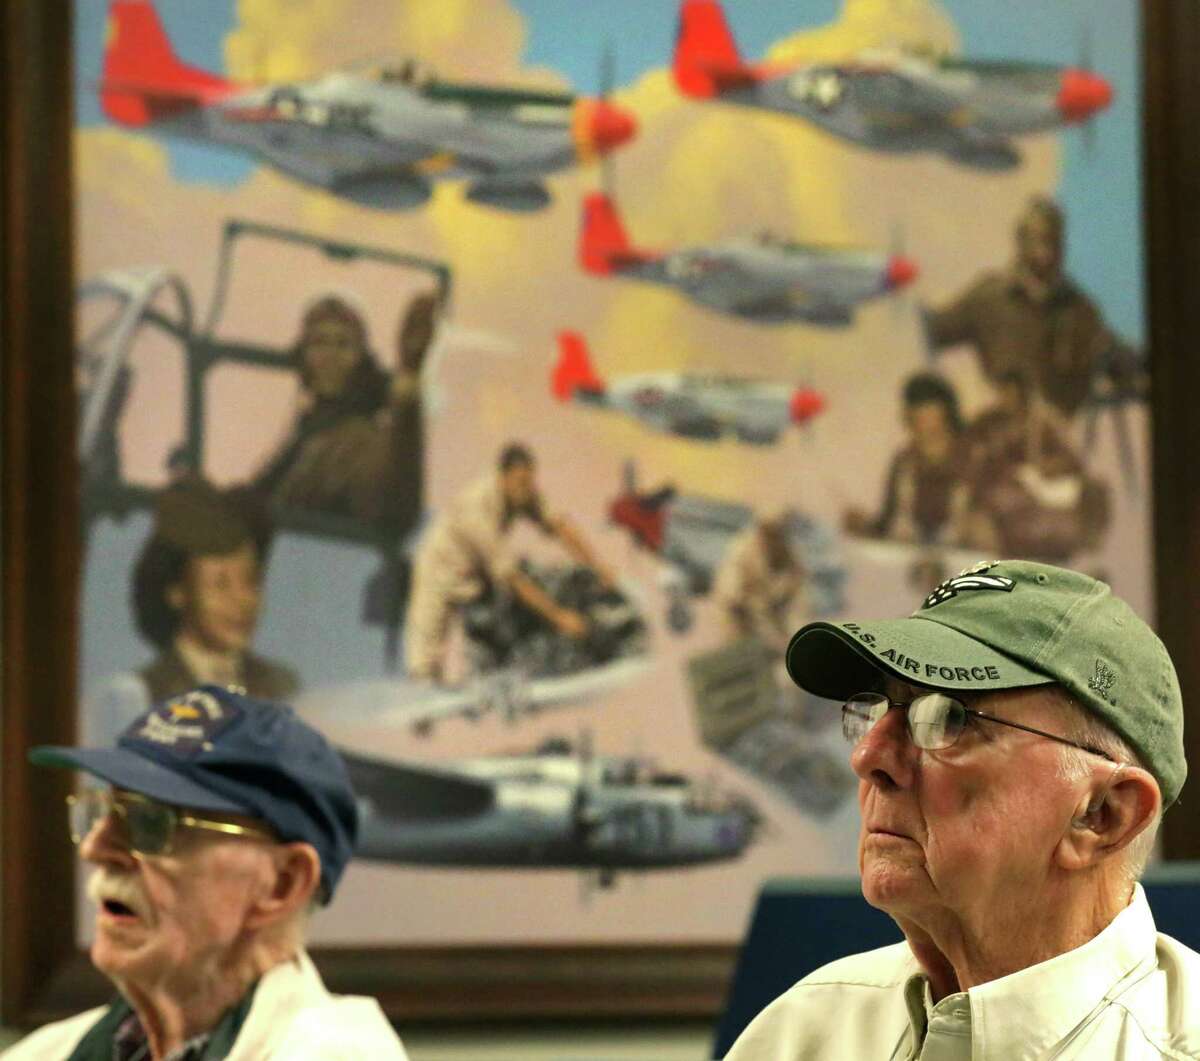 Frank Thornburg Jr., right, and other Army Air Corps veterans from the U.S. Air Force Pilot Classes of World War II, listen to an introduction of the 99th Flight Training Squadron with was home of the Tuskegee Airmen, as a group of WWII pilots tour Joint Base San Antonio-Randolph on Friday, Sept. 25, 2015.